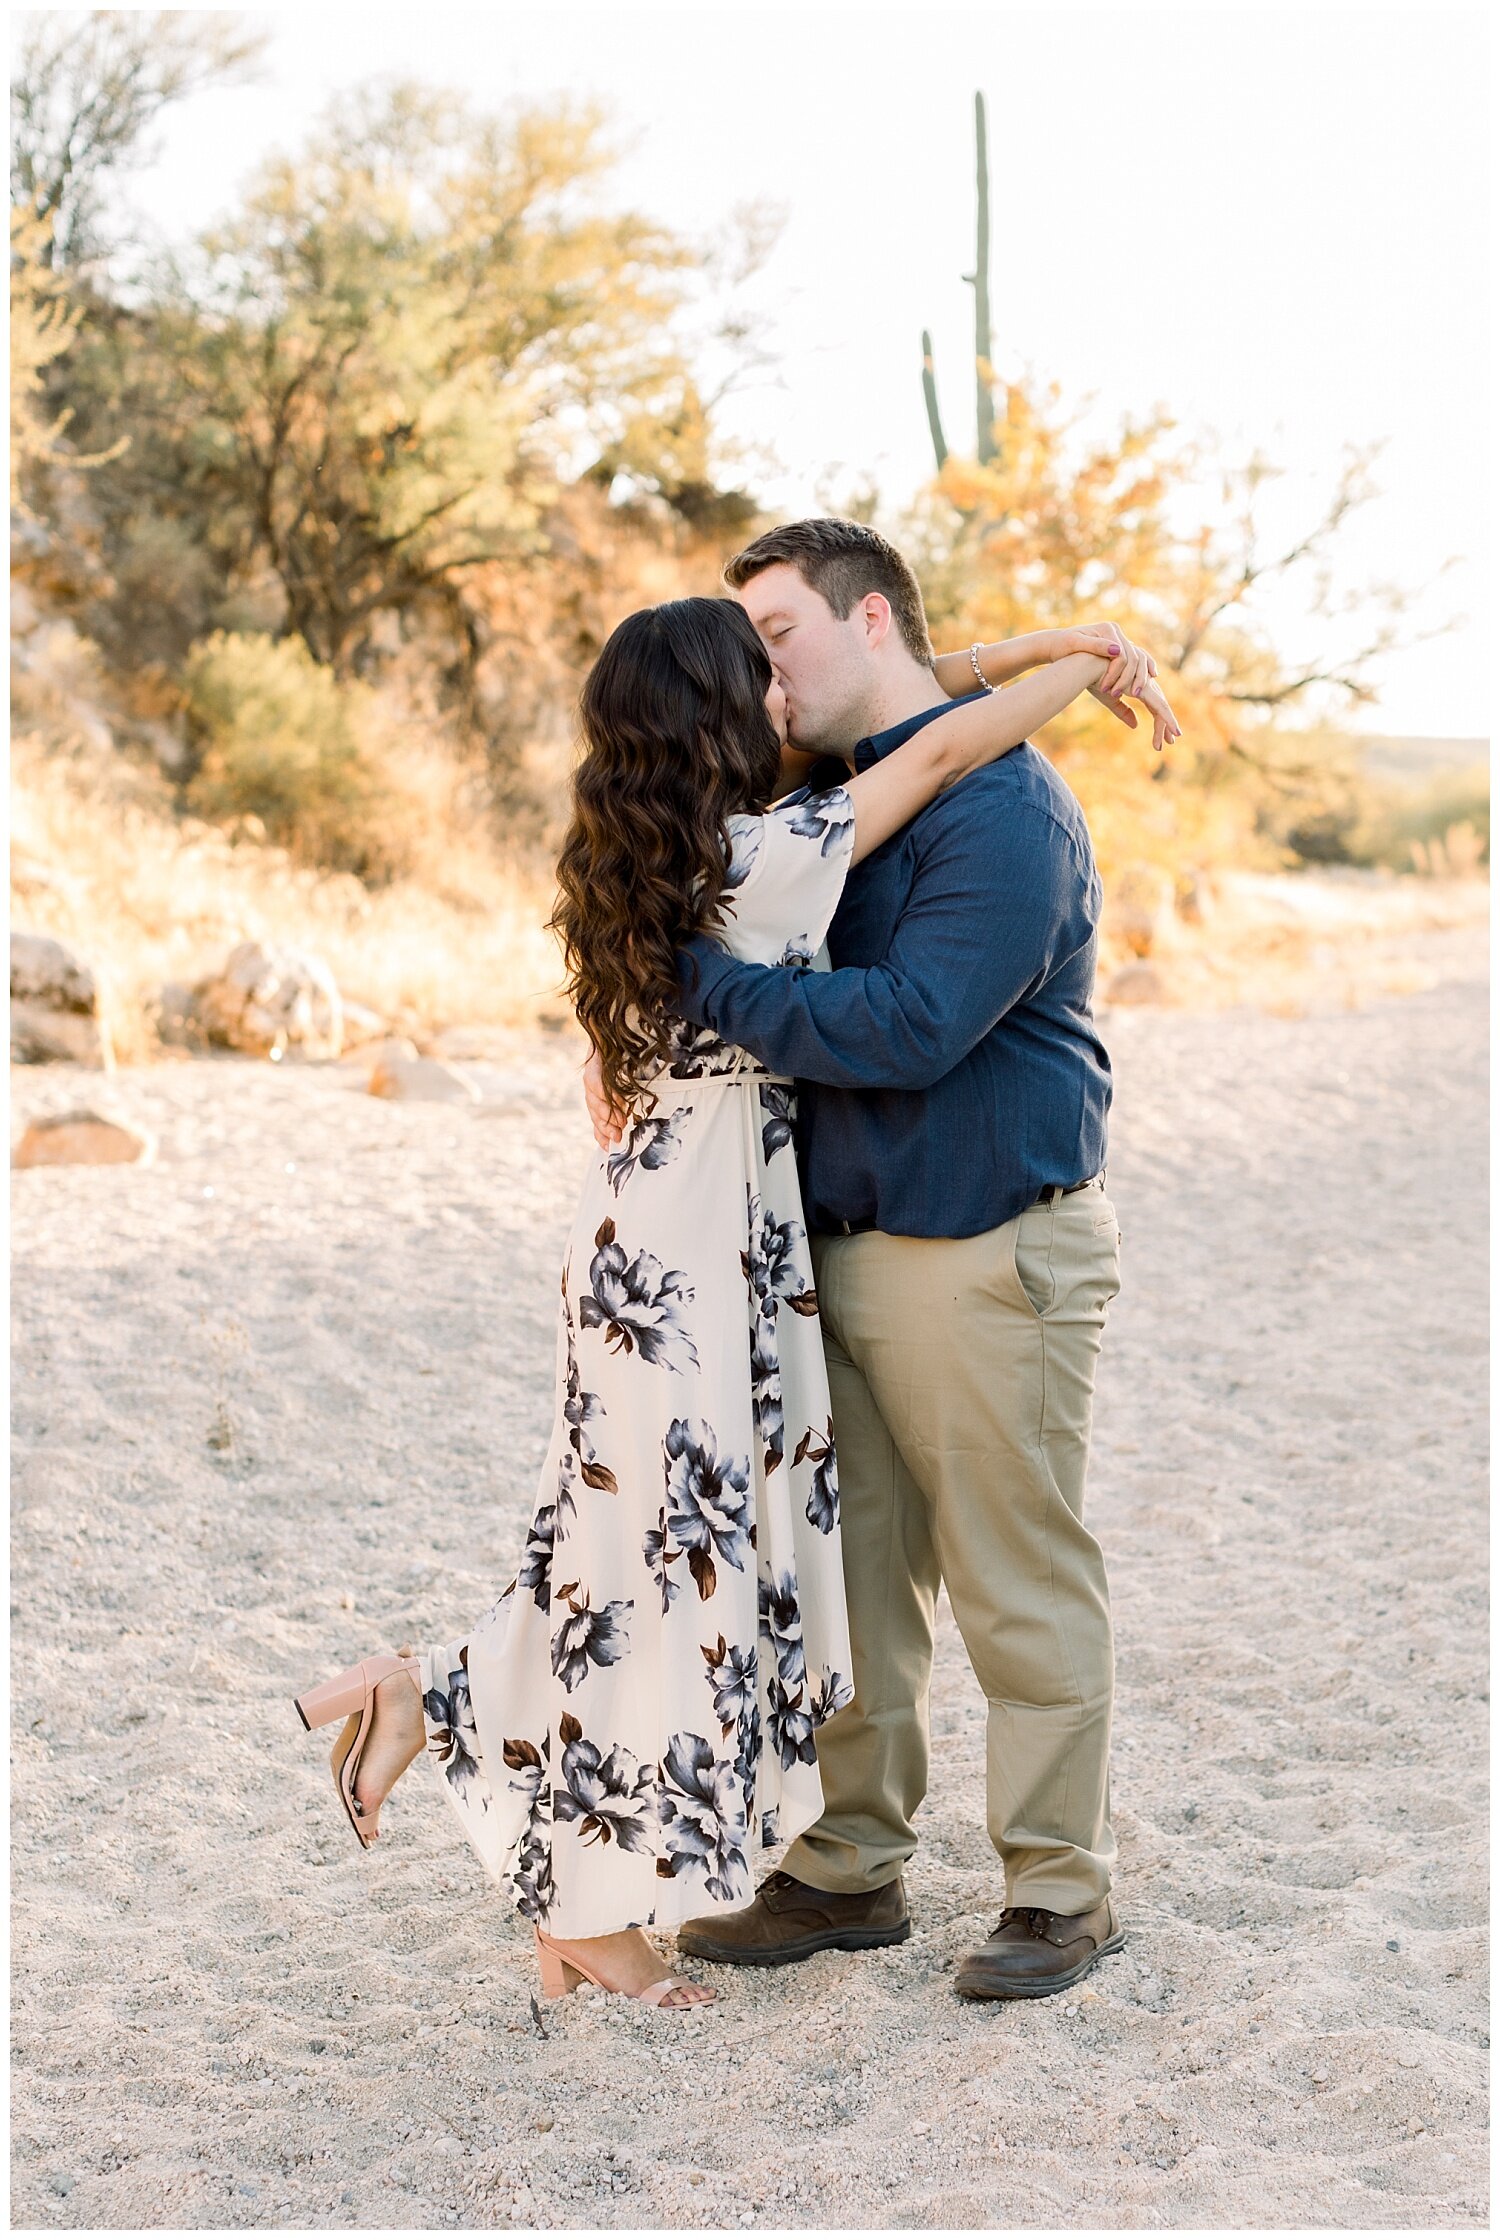 Blue and Ivory dress to wear to desert engagement session.